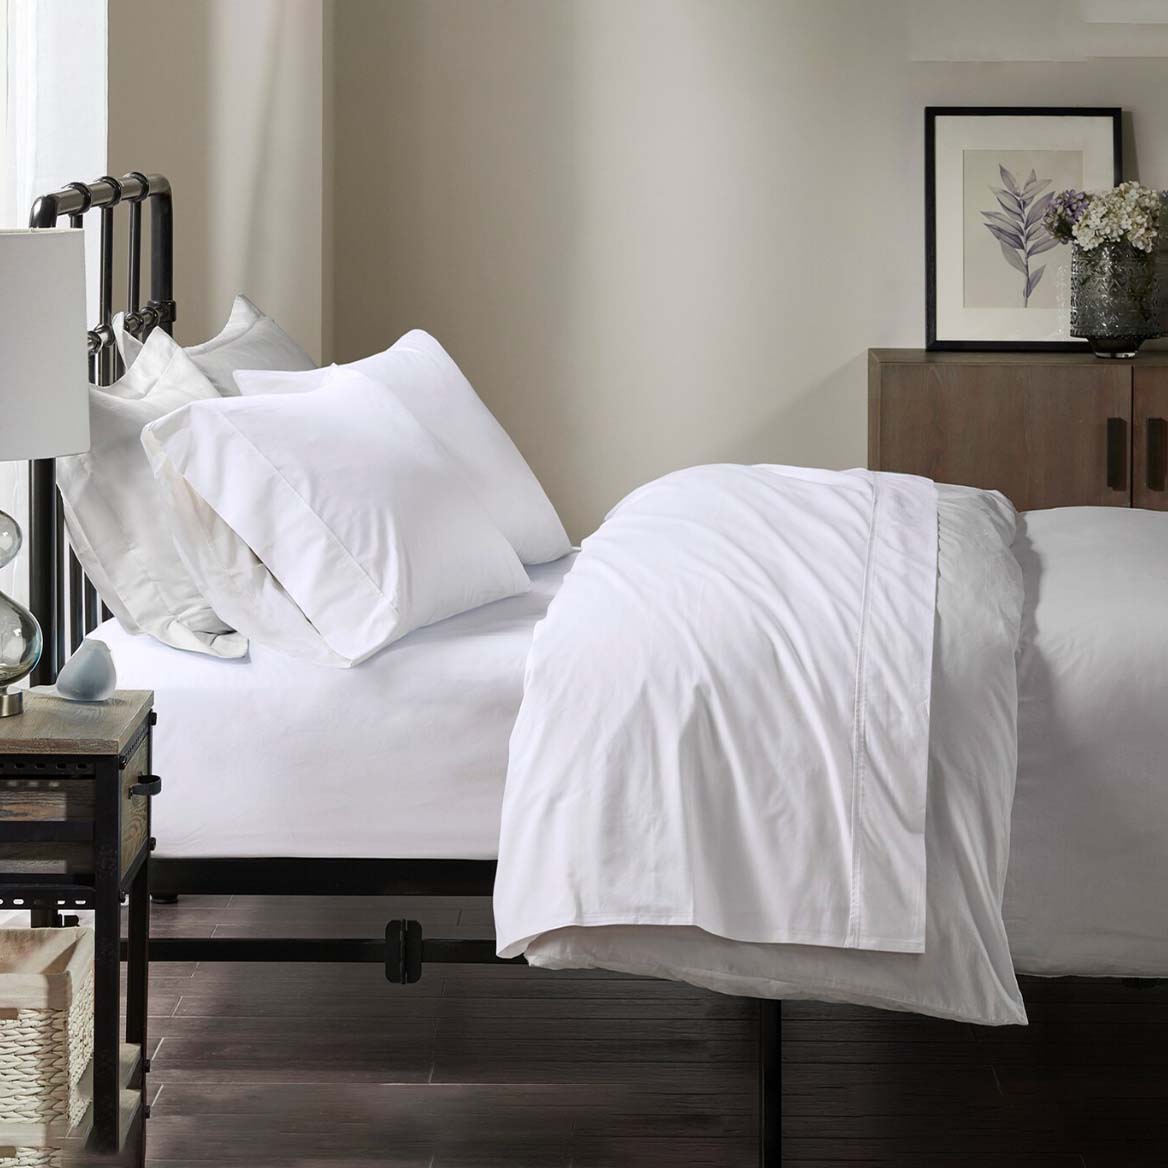 Image of white sheet in bedroom setting